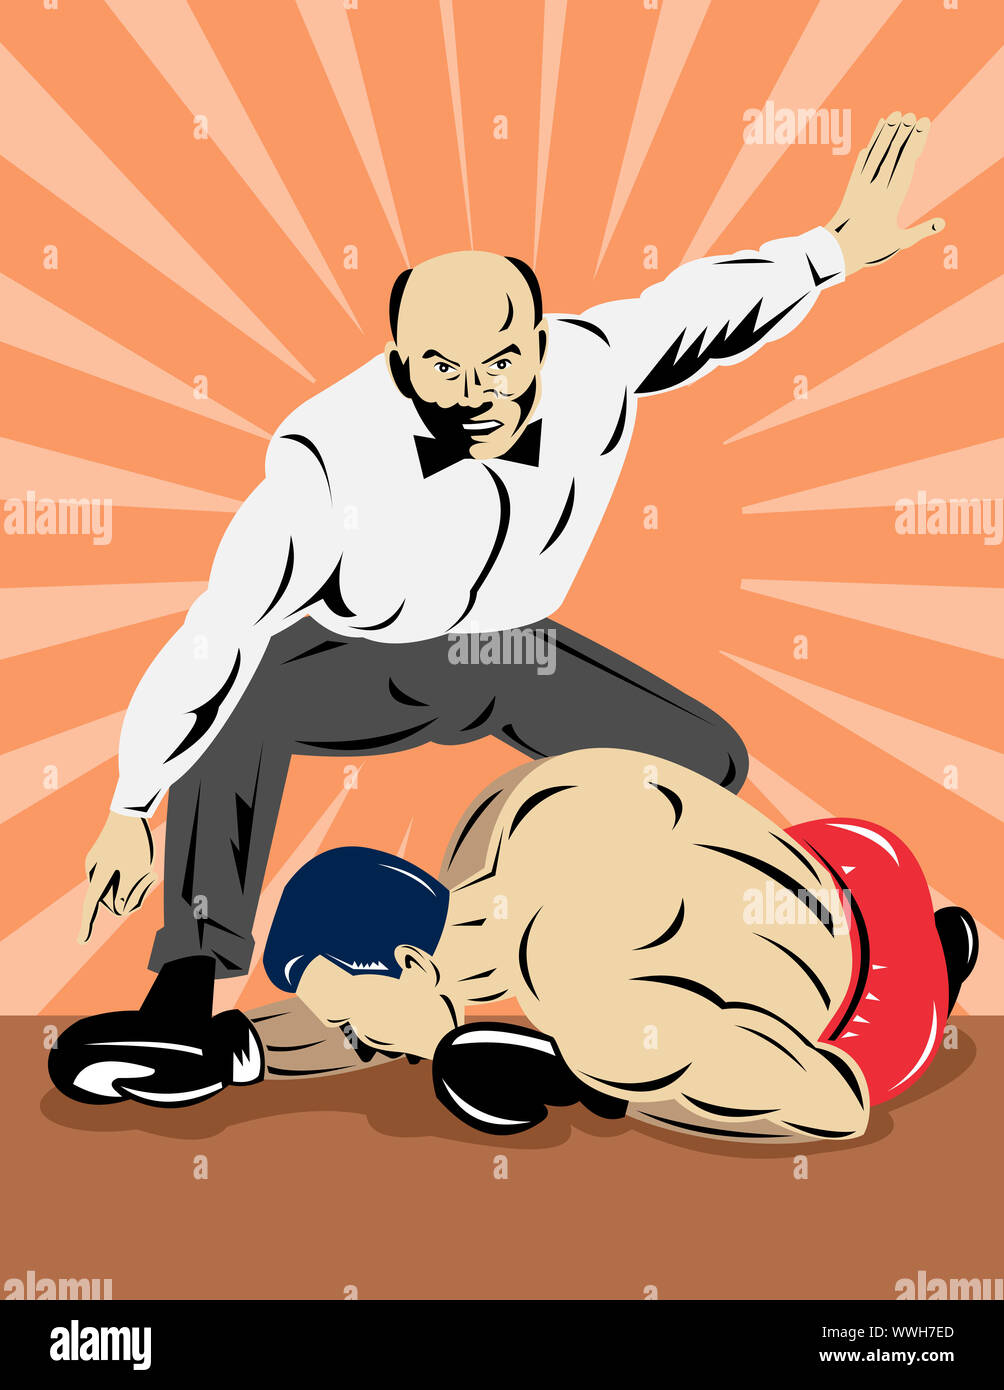 illustration of a referee counting down a boxer on floor done in retro style Stock Photo